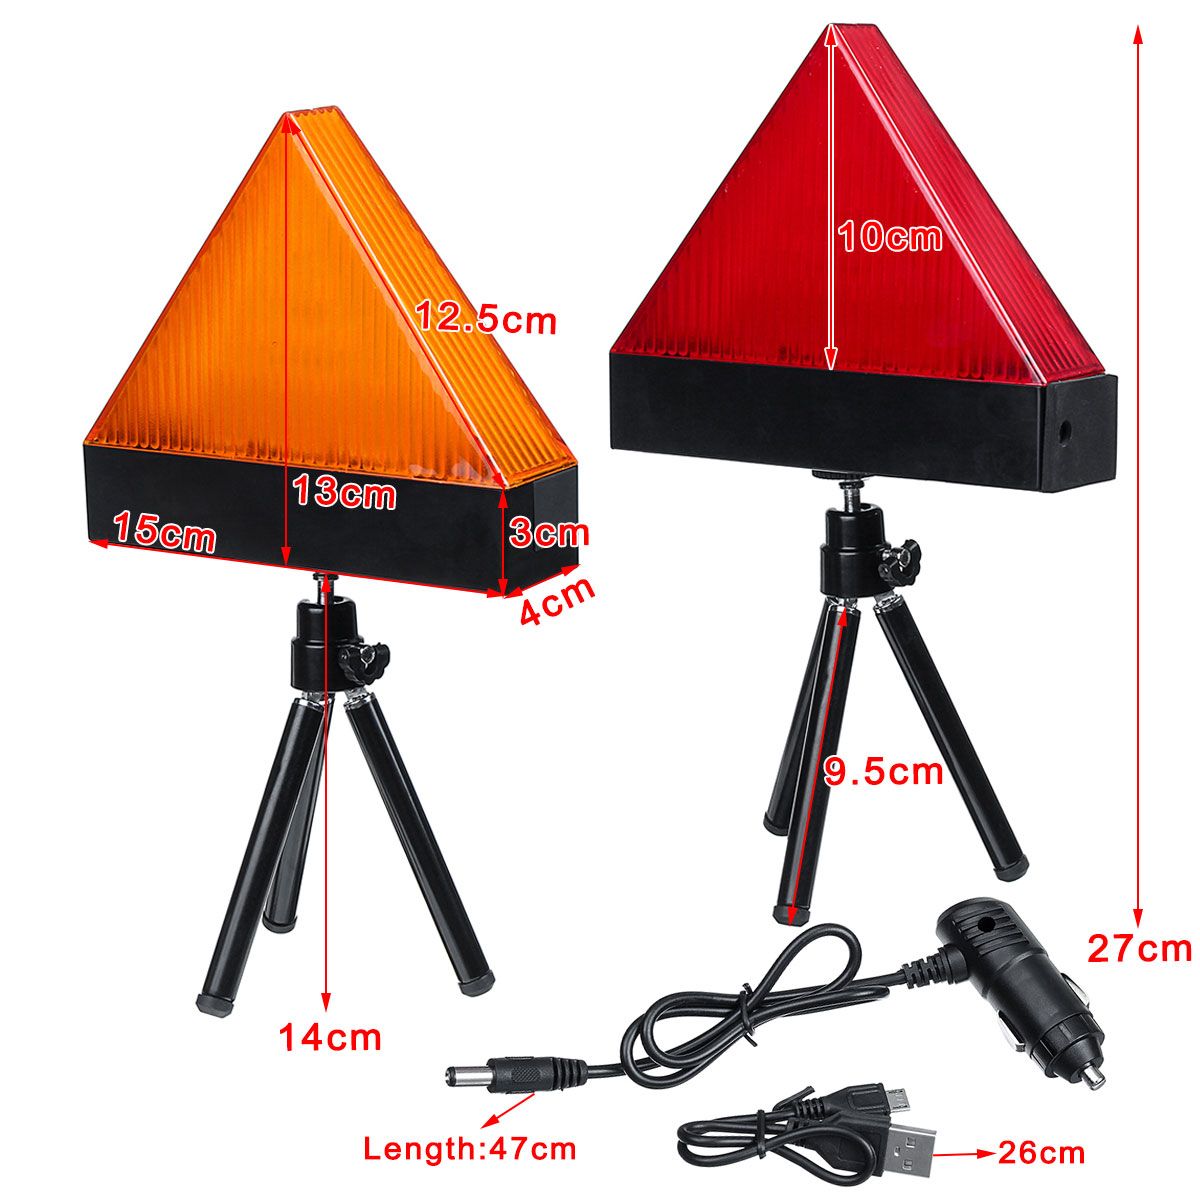 Universal-Rechargeable-LED-Car-Triangle-Warning-Strobe-Lights-RedYellow-with-Tripod-Emergency-Securi-1597101